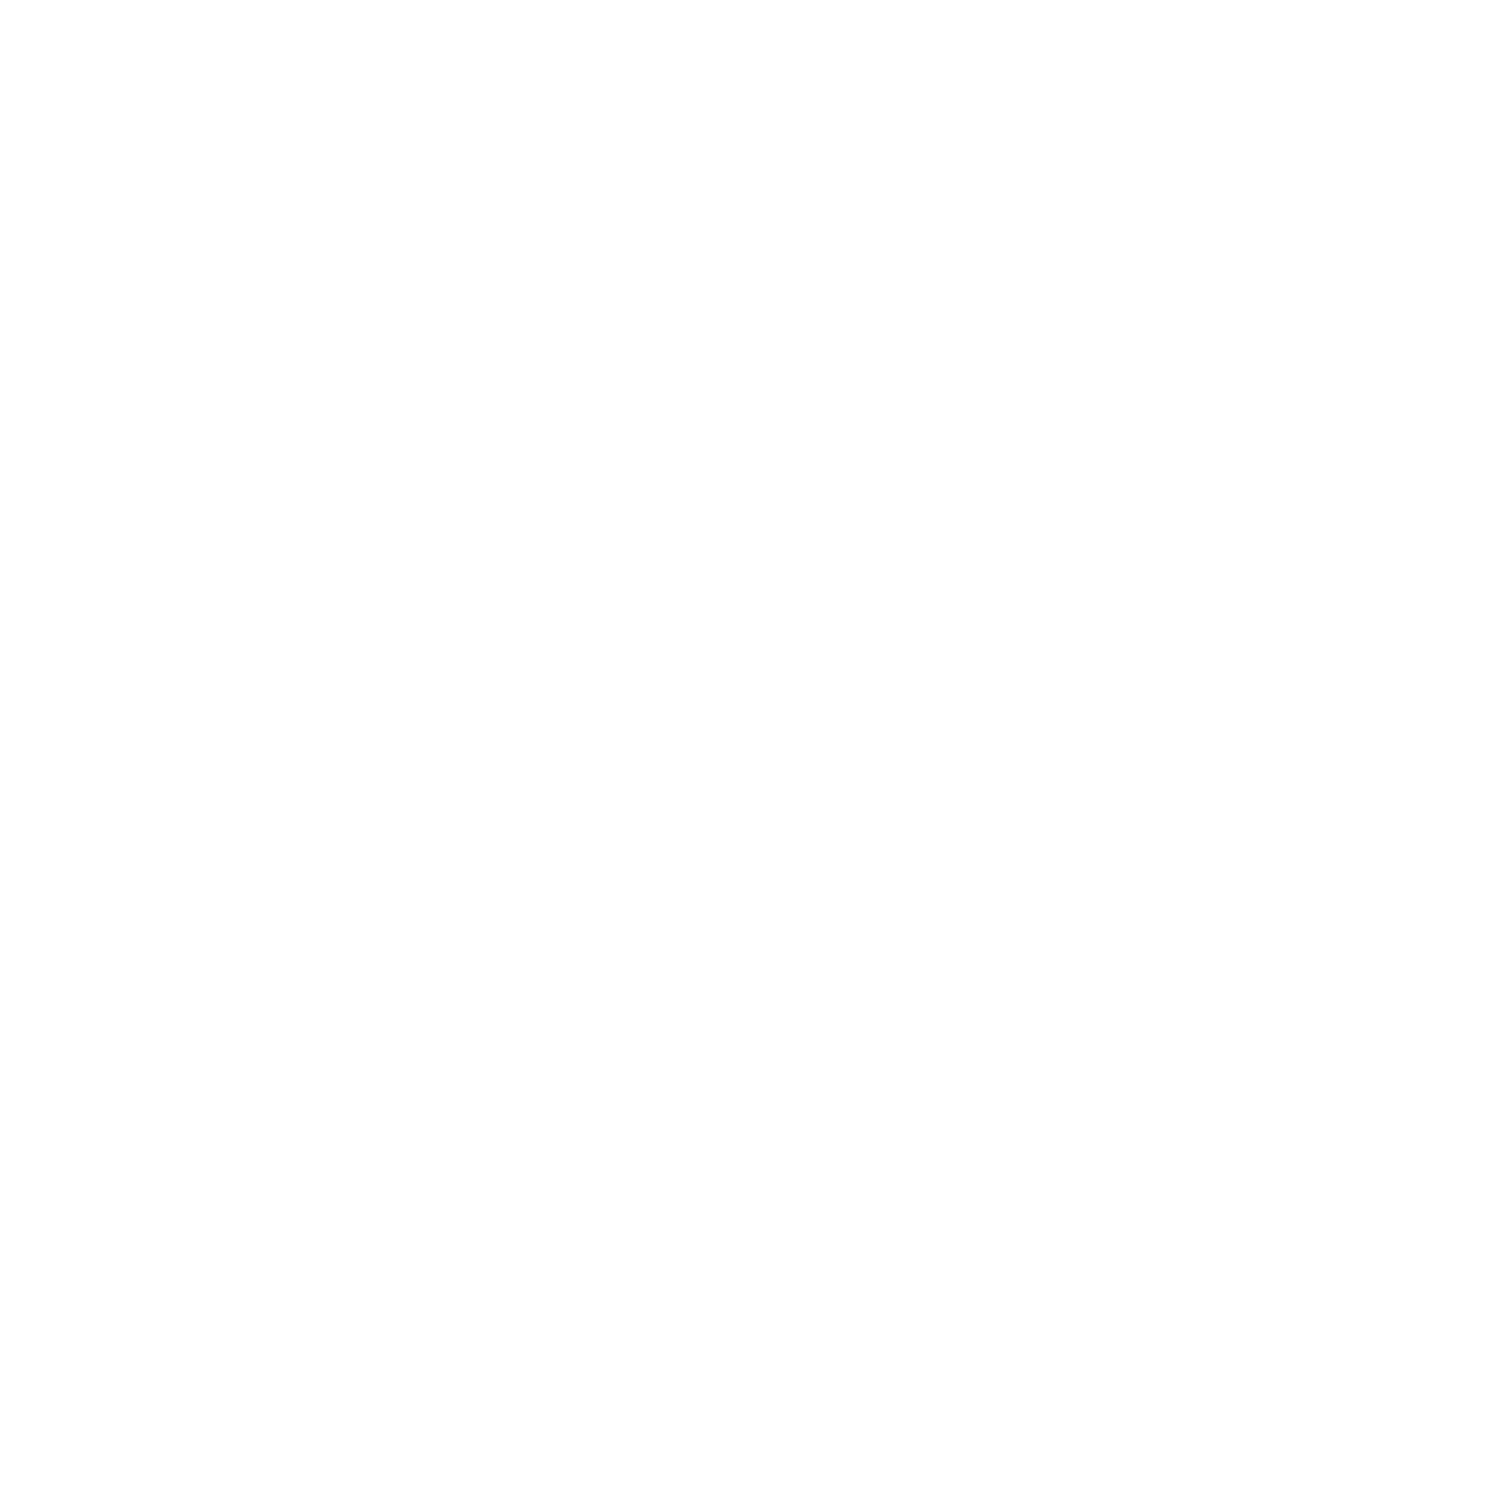 png of my Oxyte logo. Has the tagline 'photo, film & fun' written upon it.